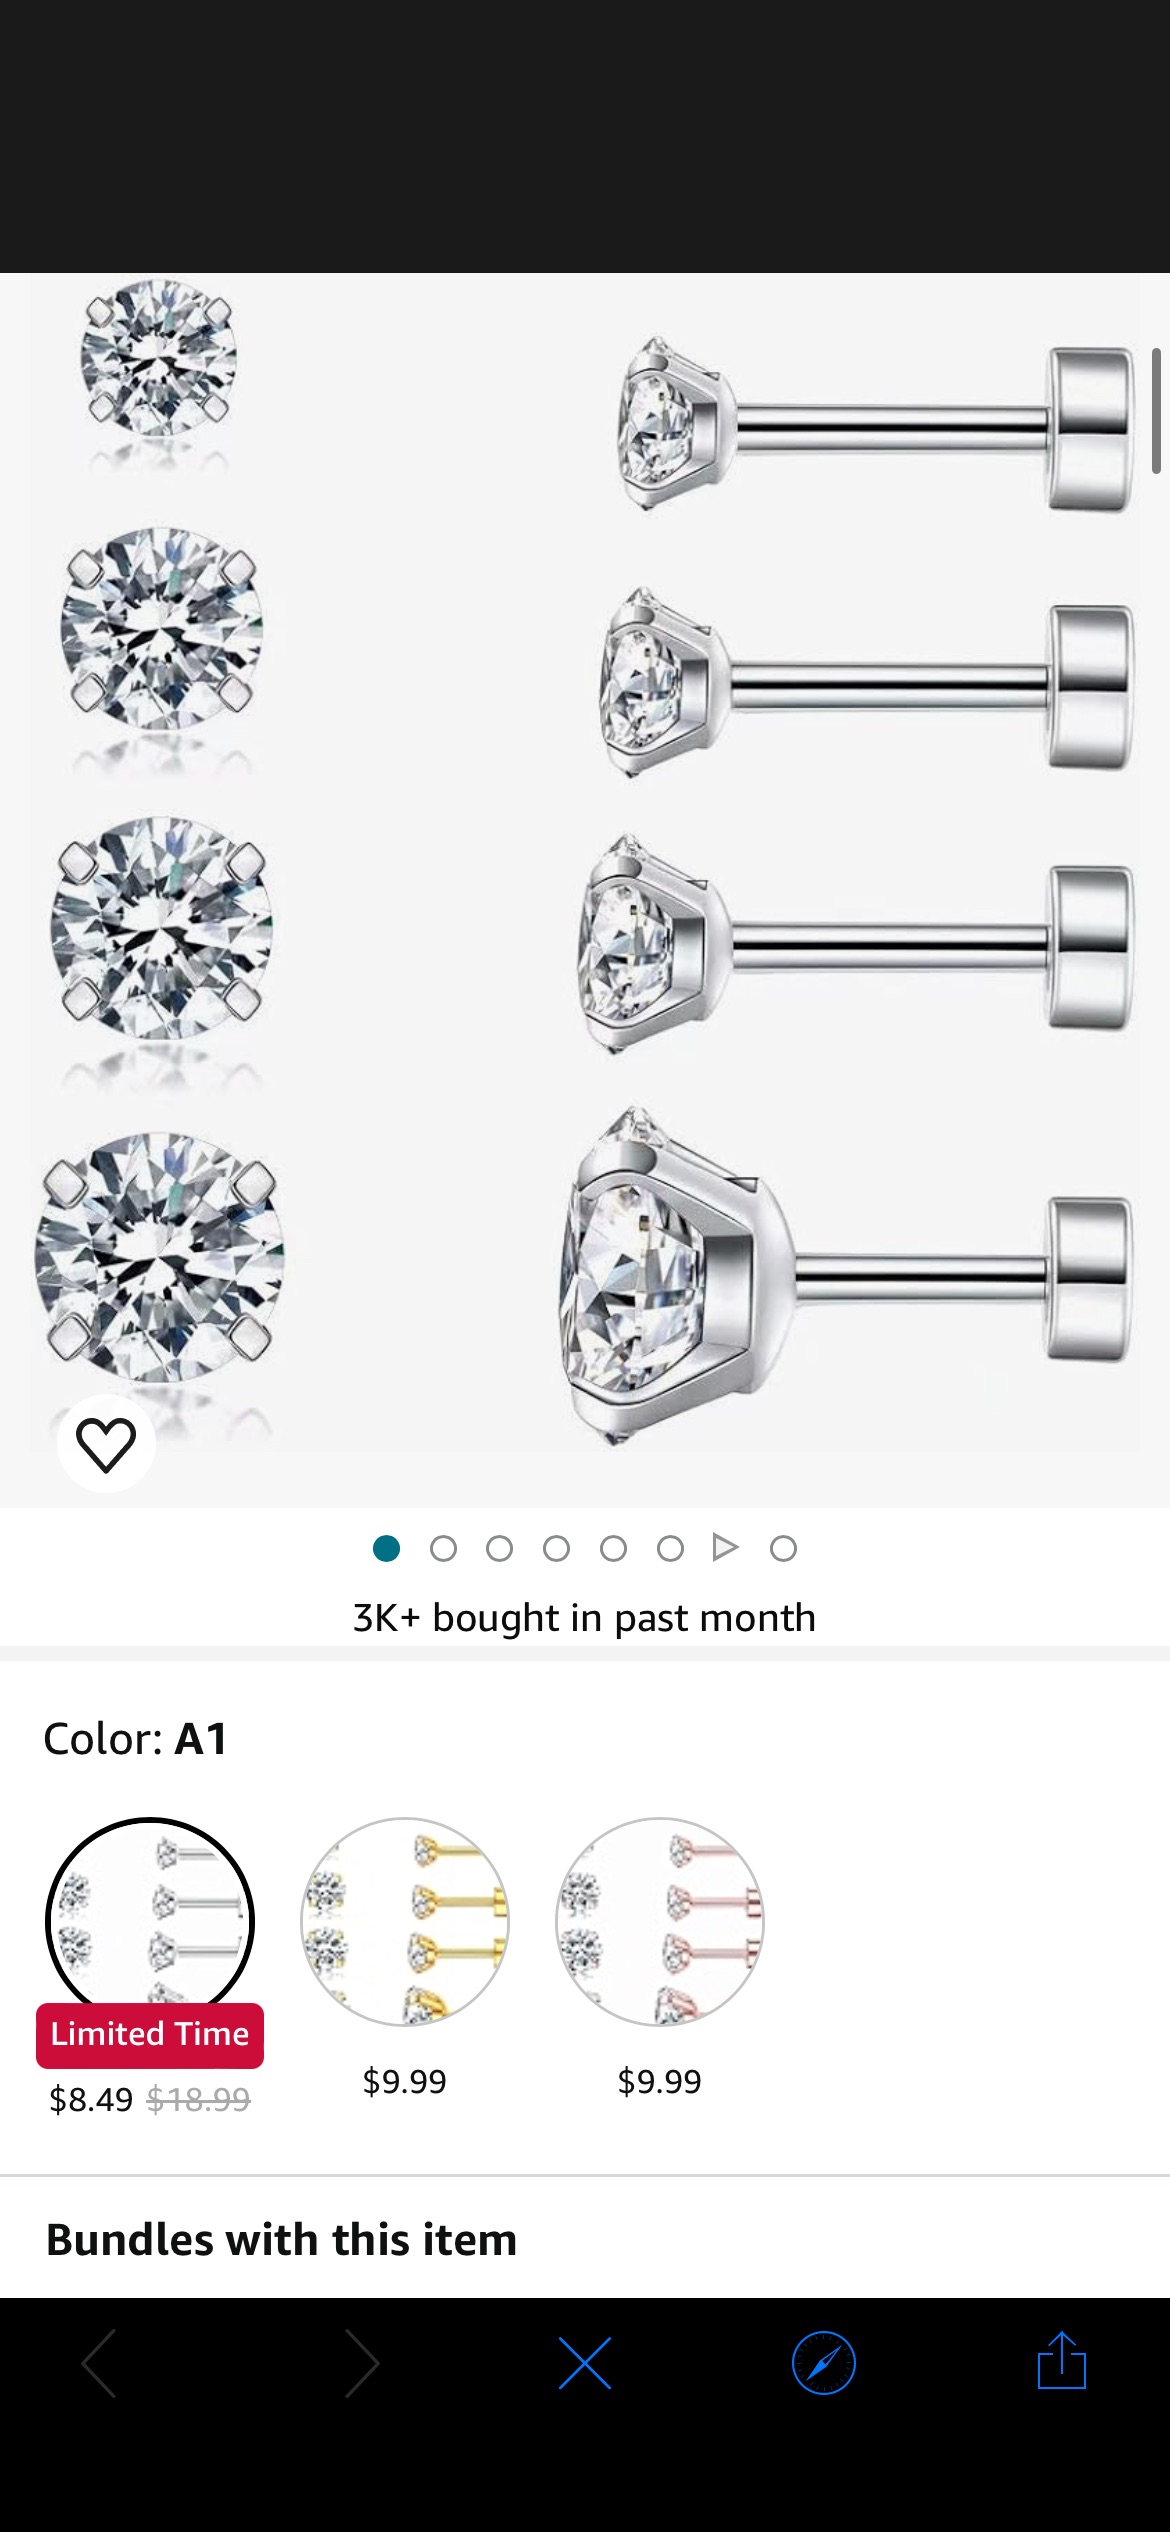 Amazon.com: Cubic Zirconia Hypoallergenic Stud Earrings for Women Men Girls Statement Cartilage Fashion Surgical Steel Helix Earrings 5 Pairs: Clothing, Shoes & Jewelry